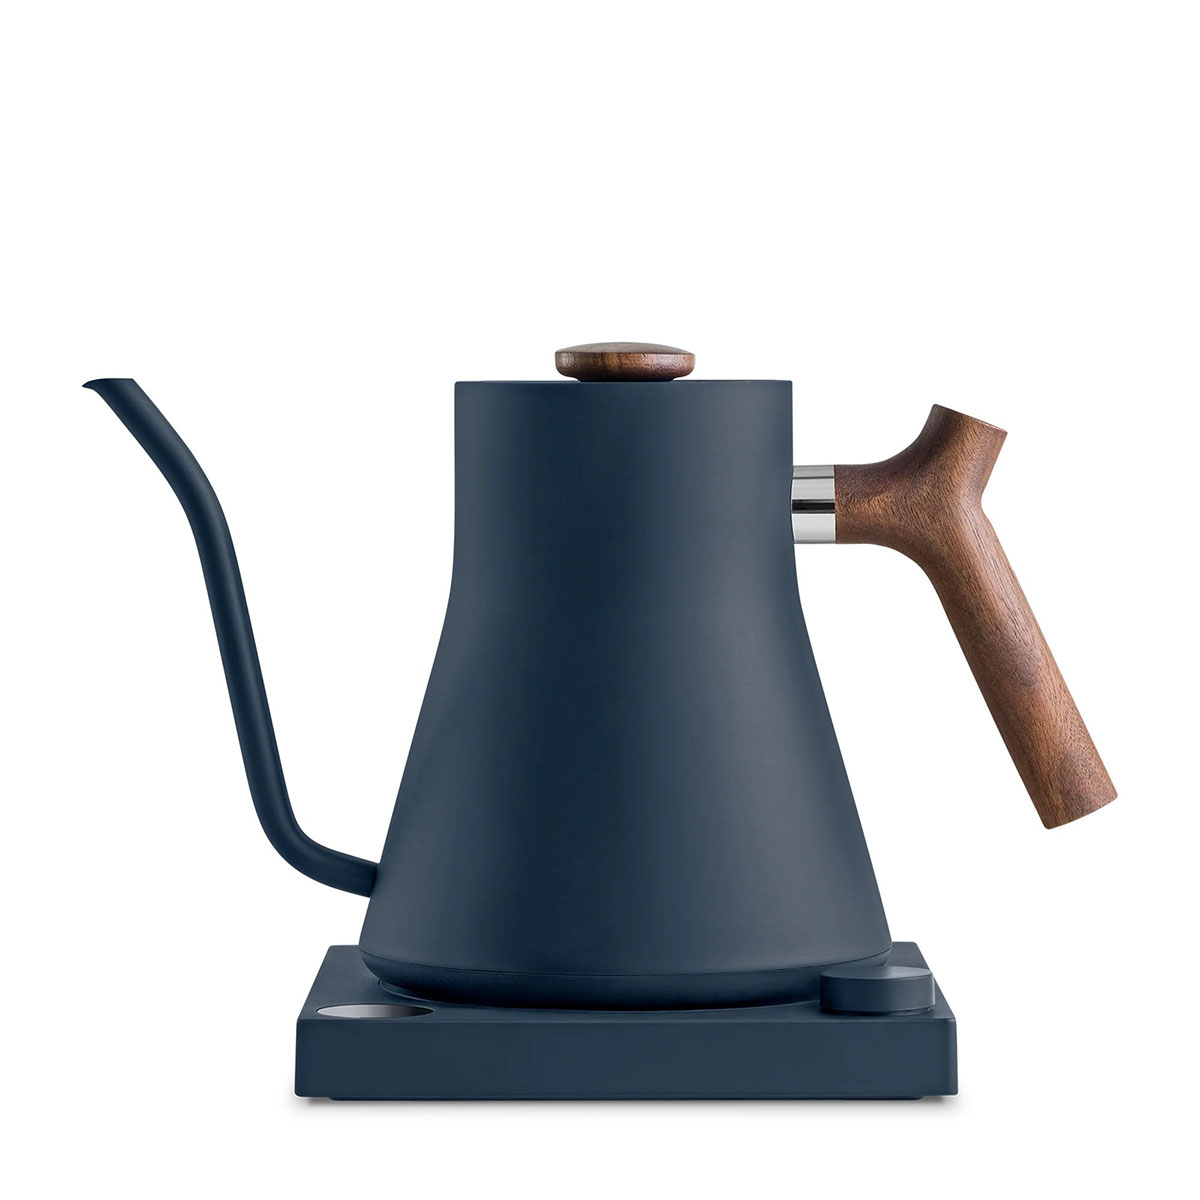 STARESSO Pour Over Coffee Kettle